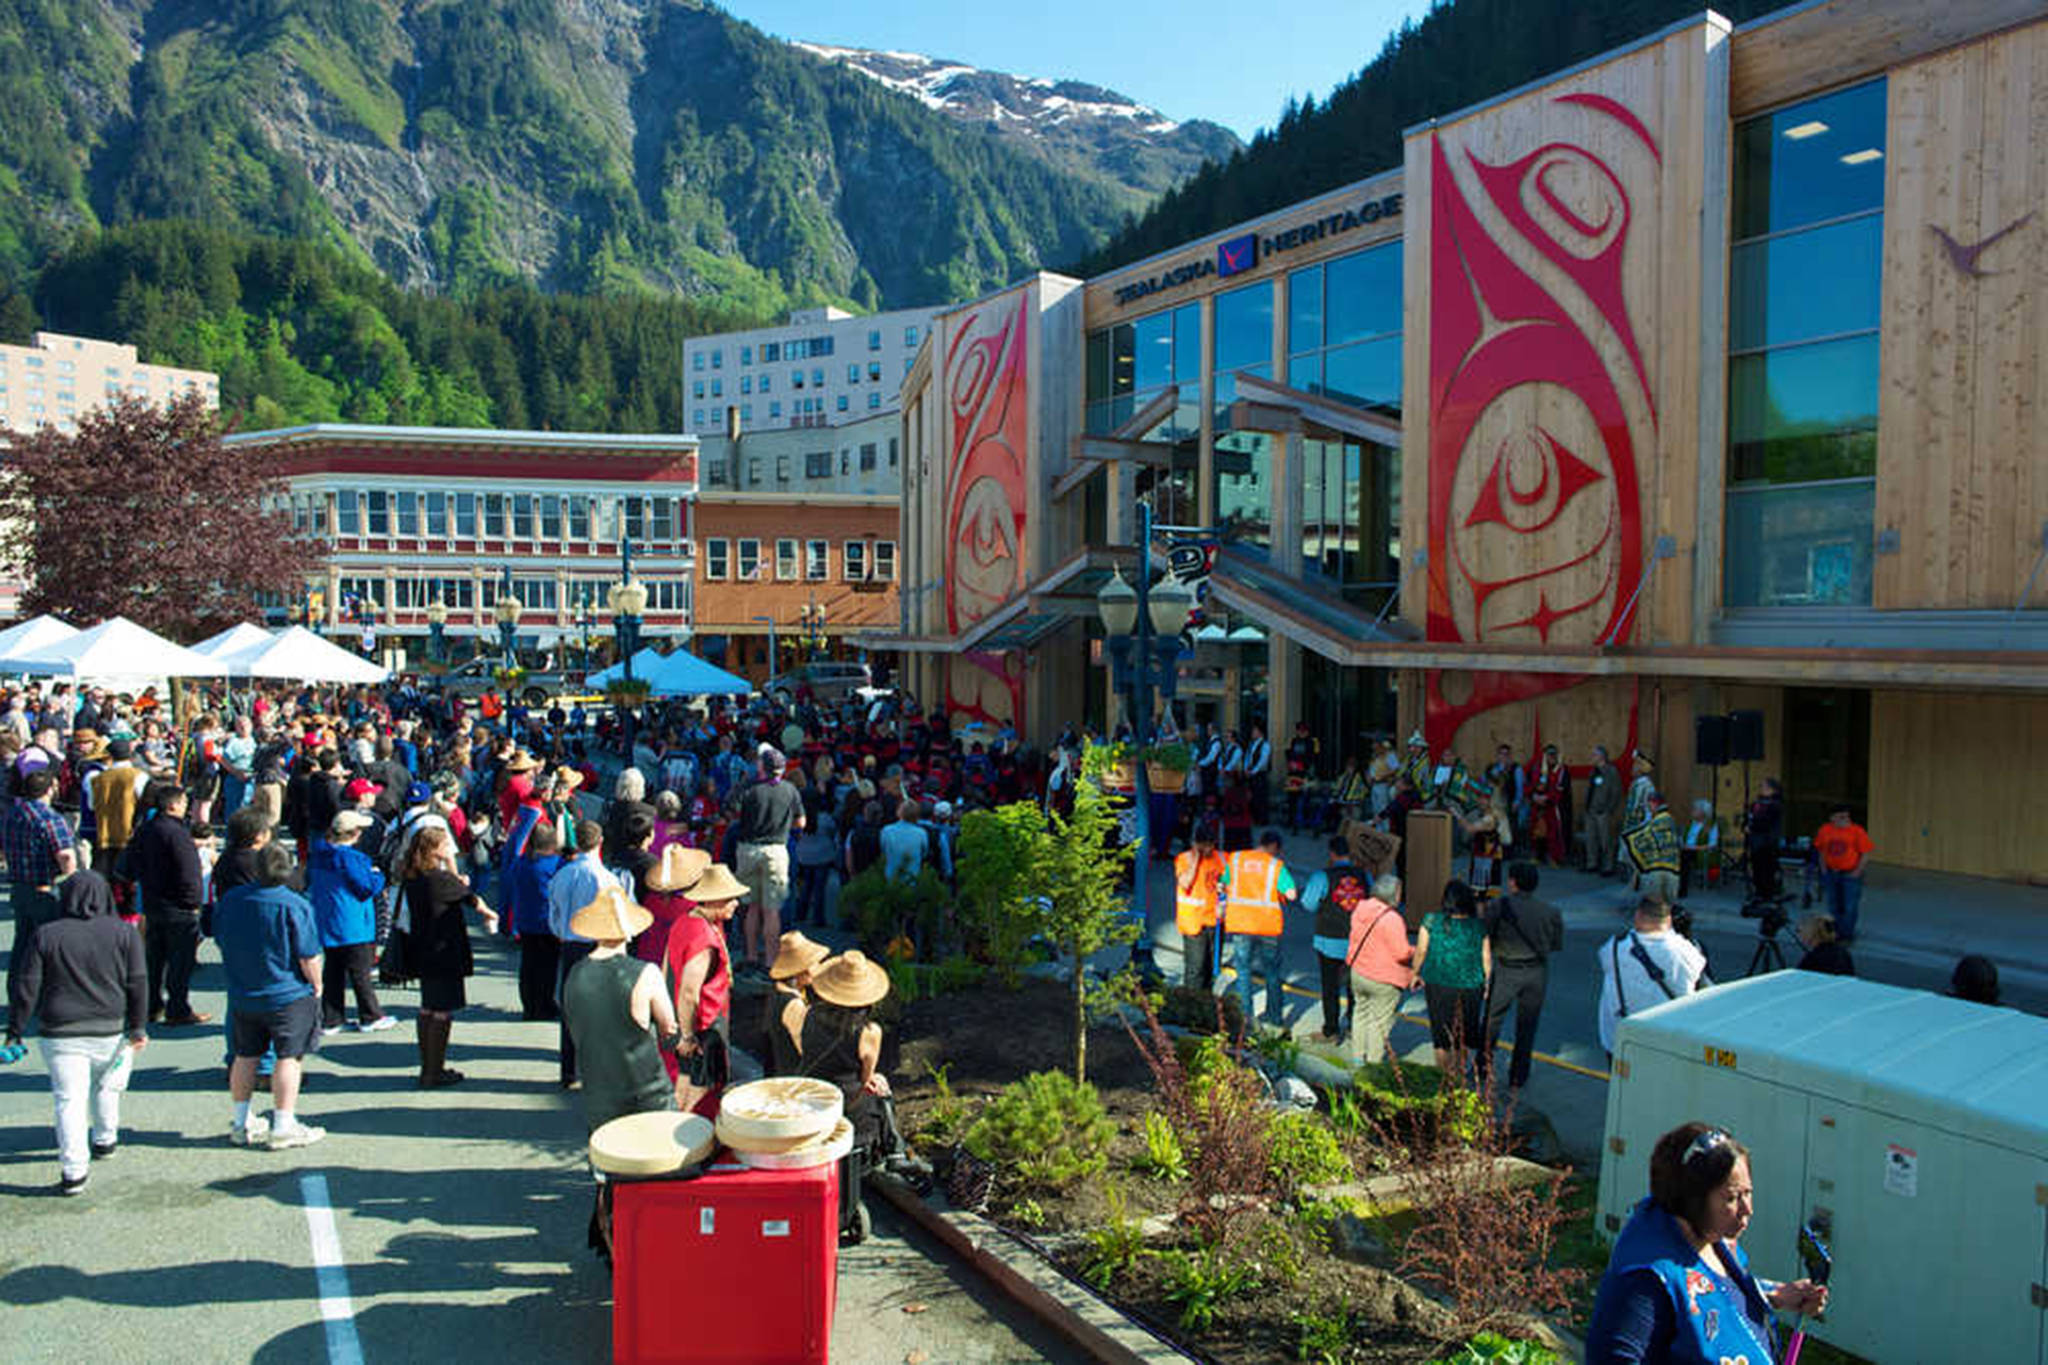 Grand opening ceremonies for the Walter Soboleff Building on May 15, 2015. The building’s opening spurred an increase in revenue that allows Sealaska Heritage Institute to have an impact of more than $9 million on Juneau. (Michael Penn | Juneau Empire File)